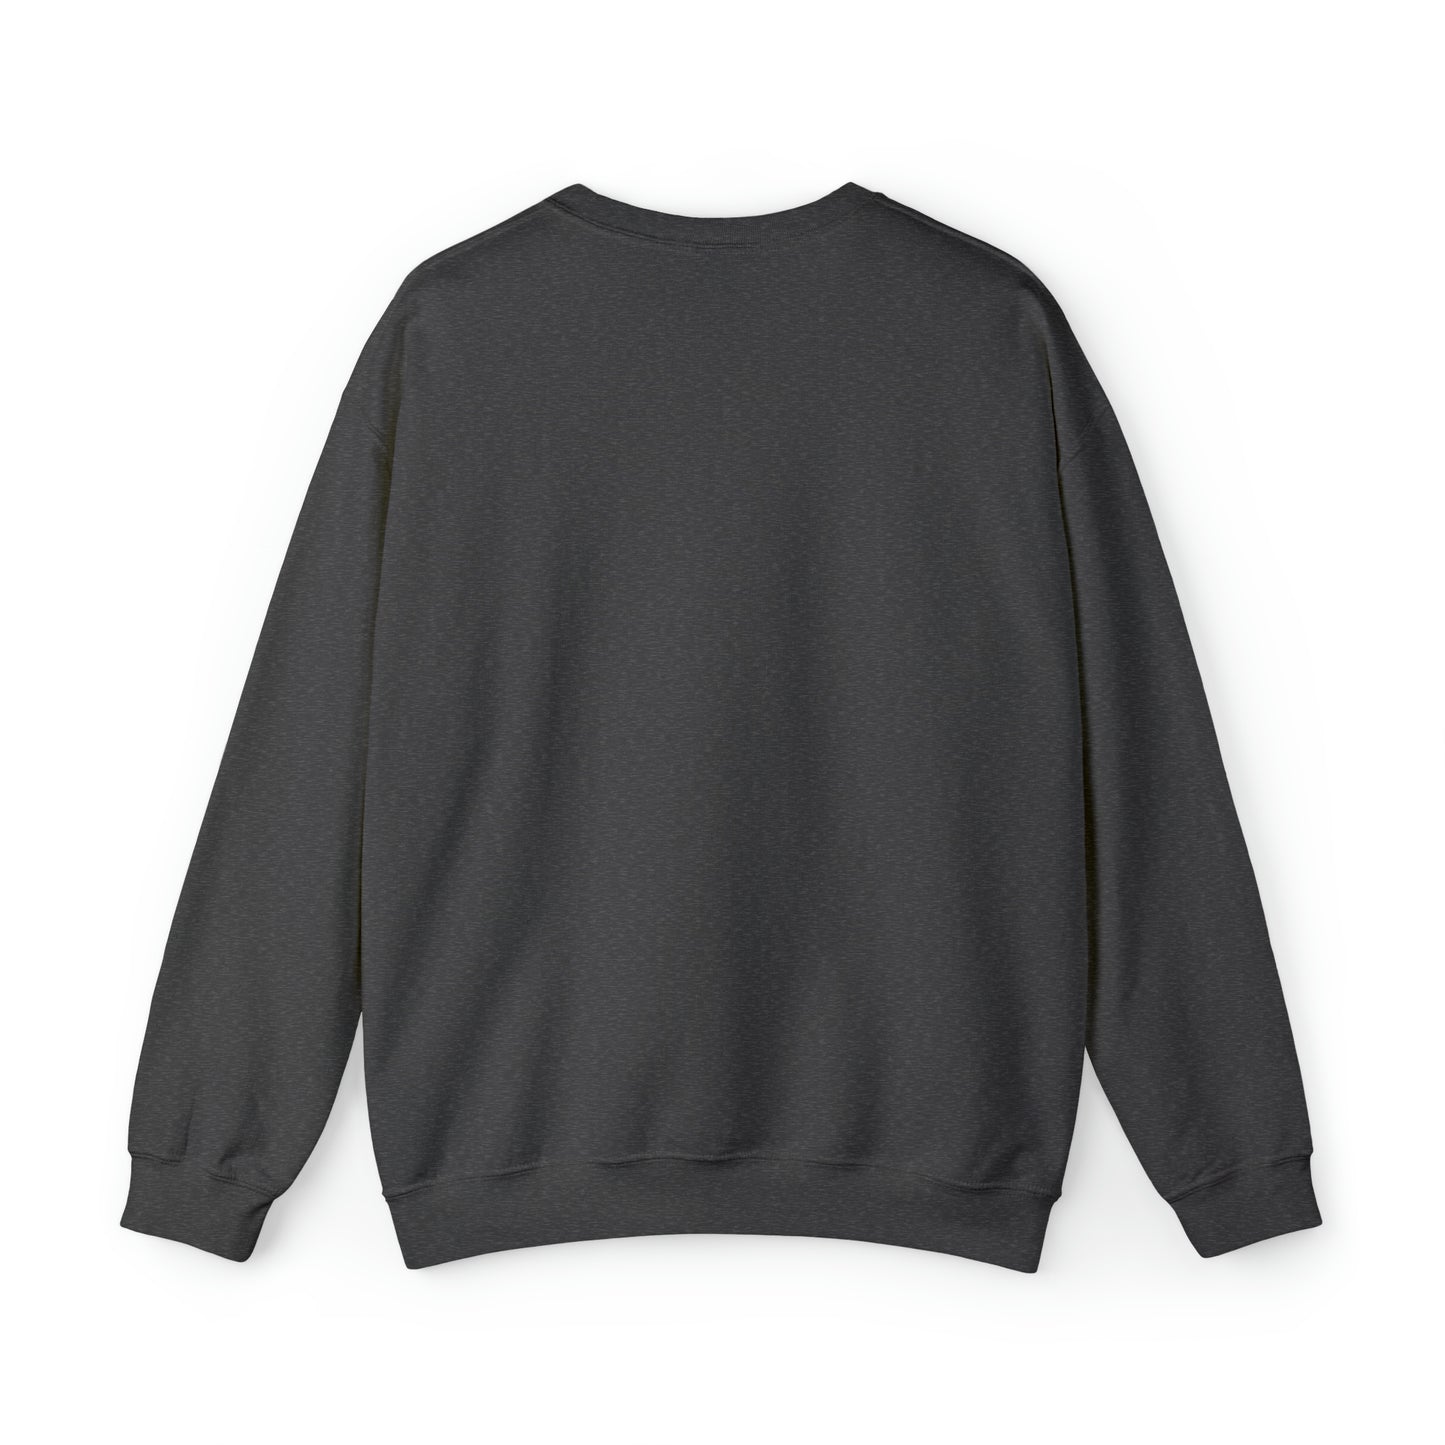 Created For This Season Cozy Sweatshirt For The Soccer Coach Wife